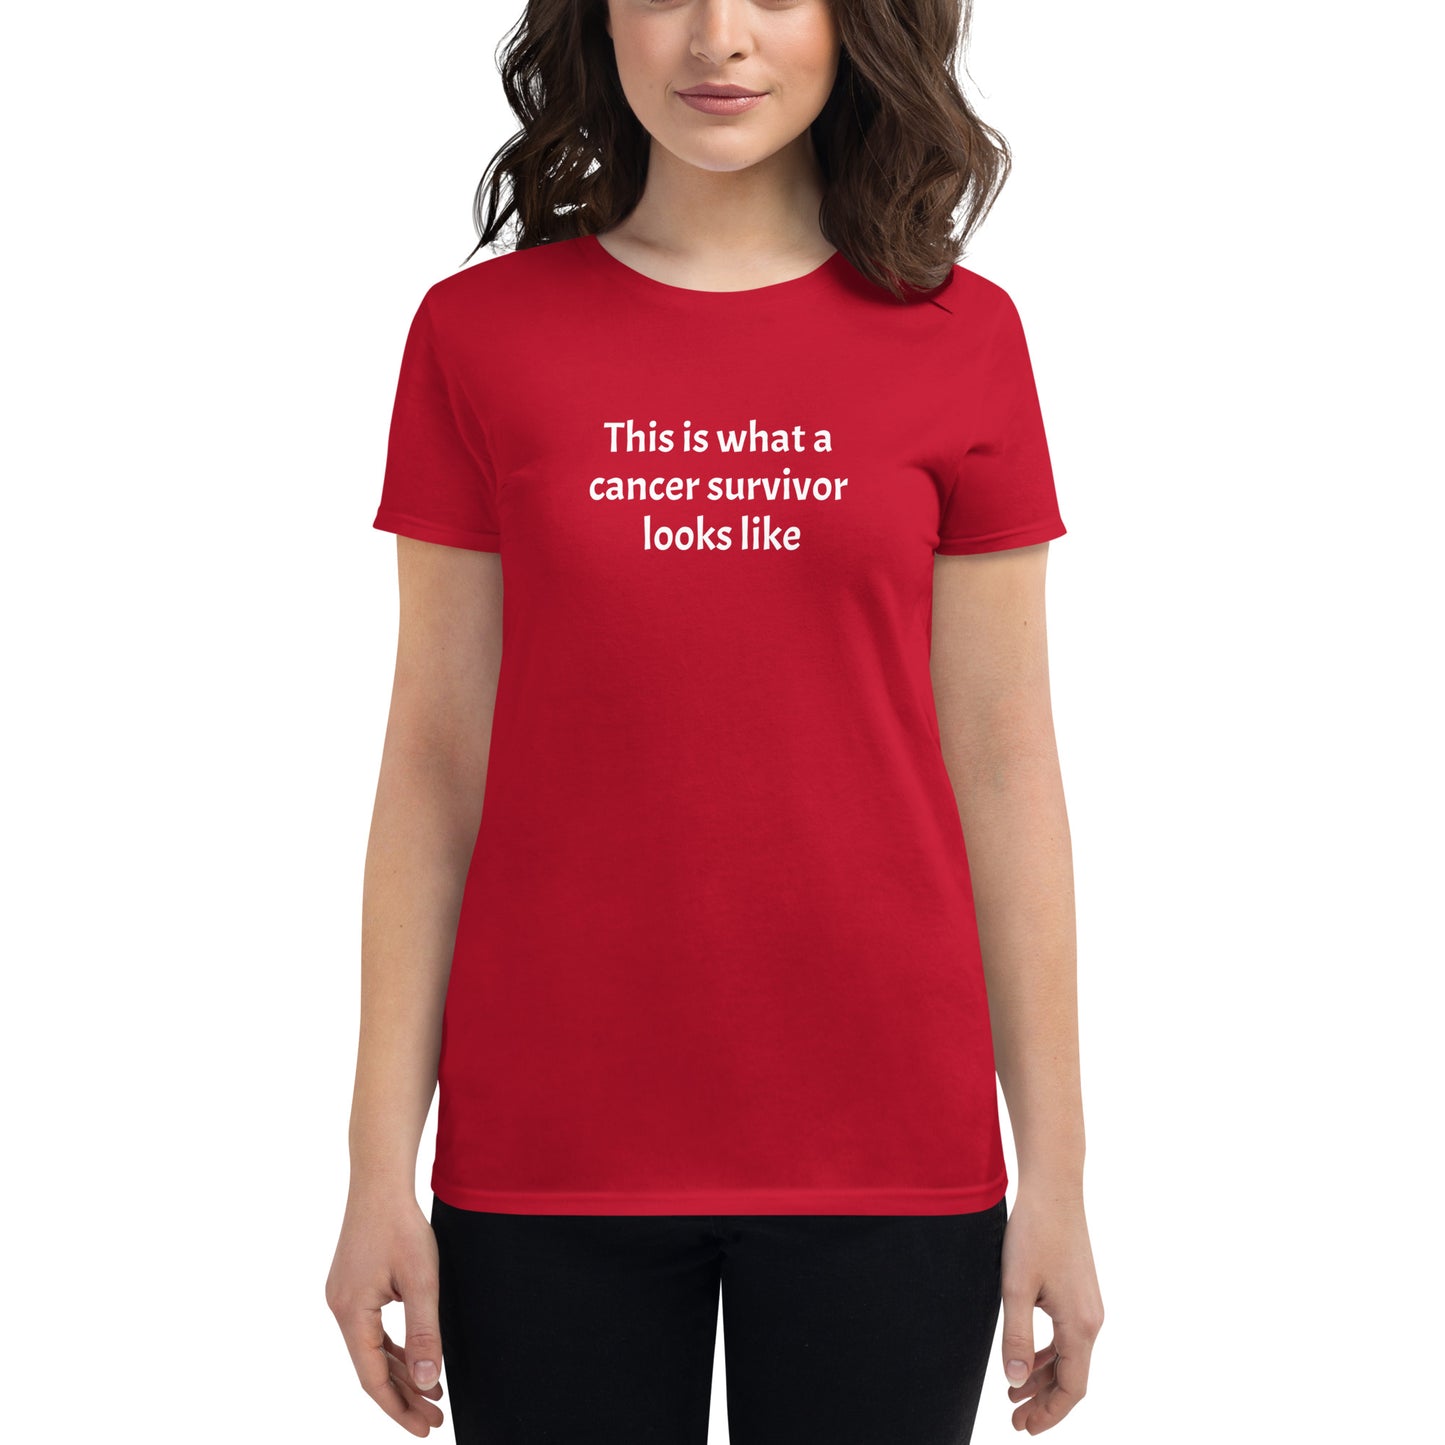 This is what a cancer survivor looks like short sleeve t-shirt (women's)